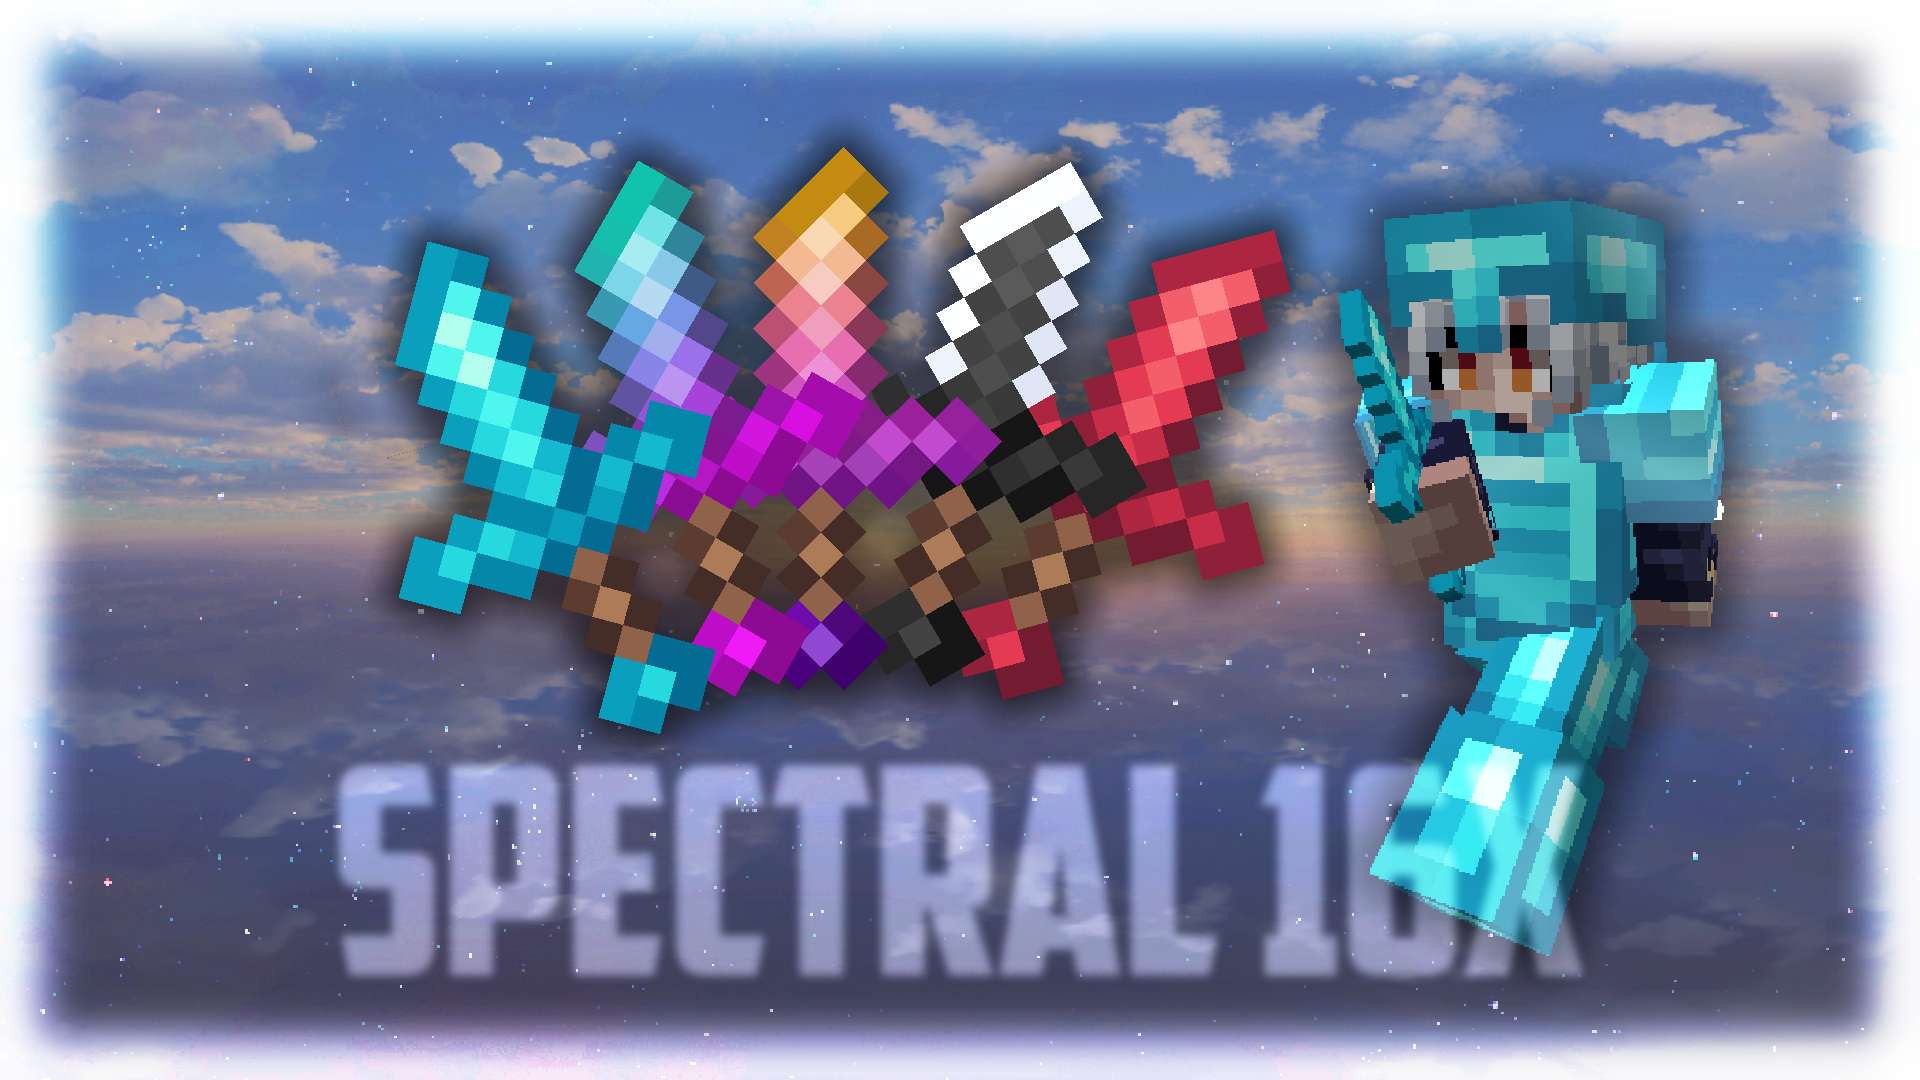 Spectral - Rose Gold 16 by Zlax on PvPRP